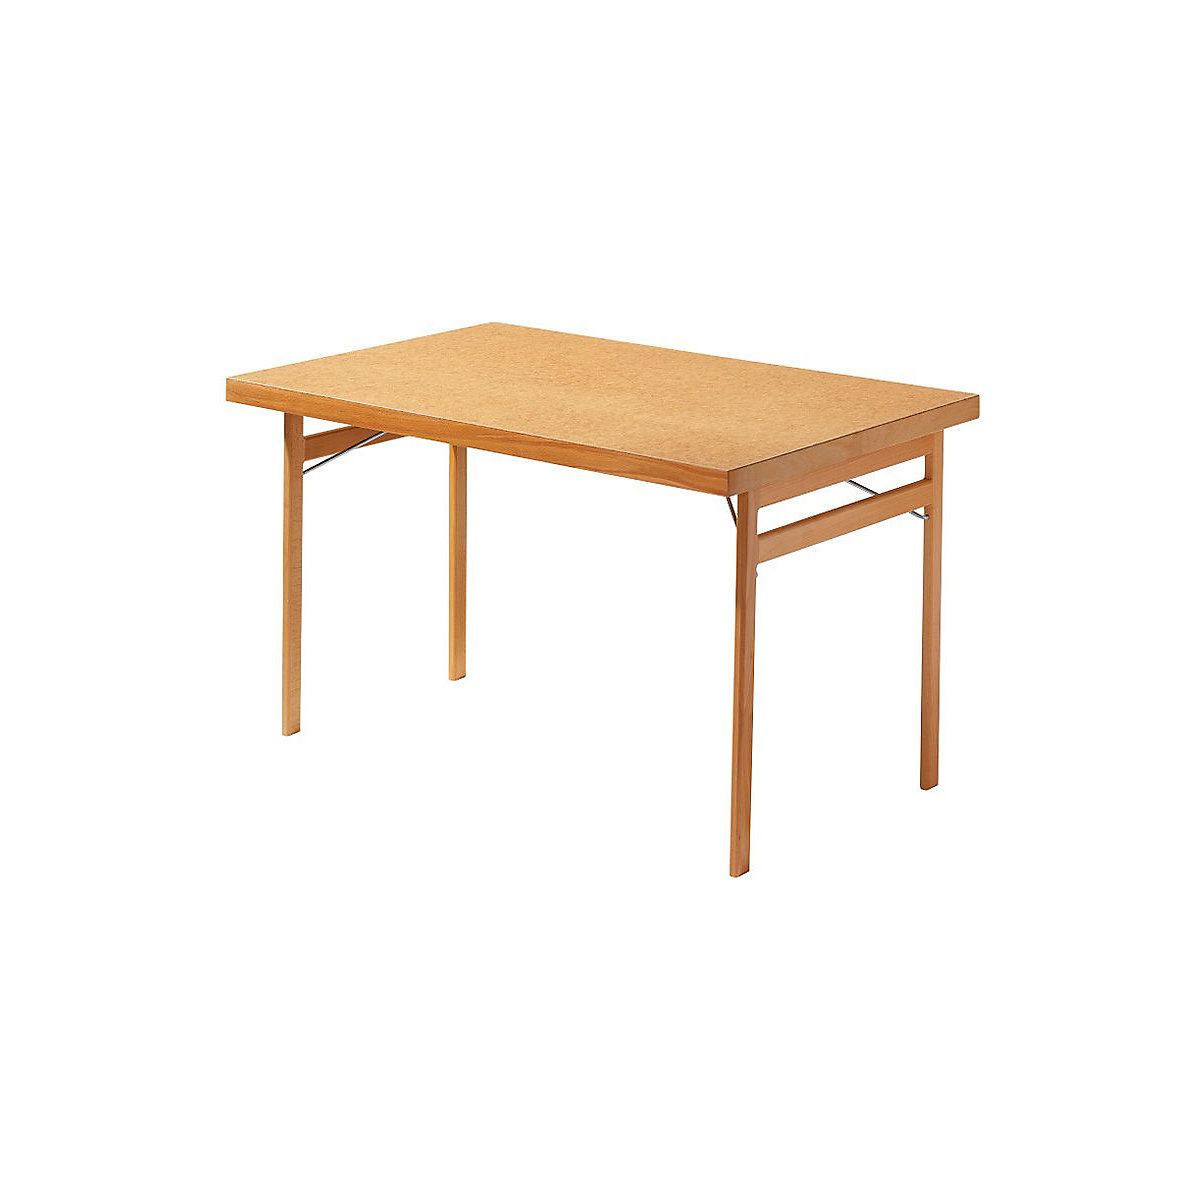 Folding table, solid wood frame, beech, WxD 1200 x 800 mm, wood tabletop-3